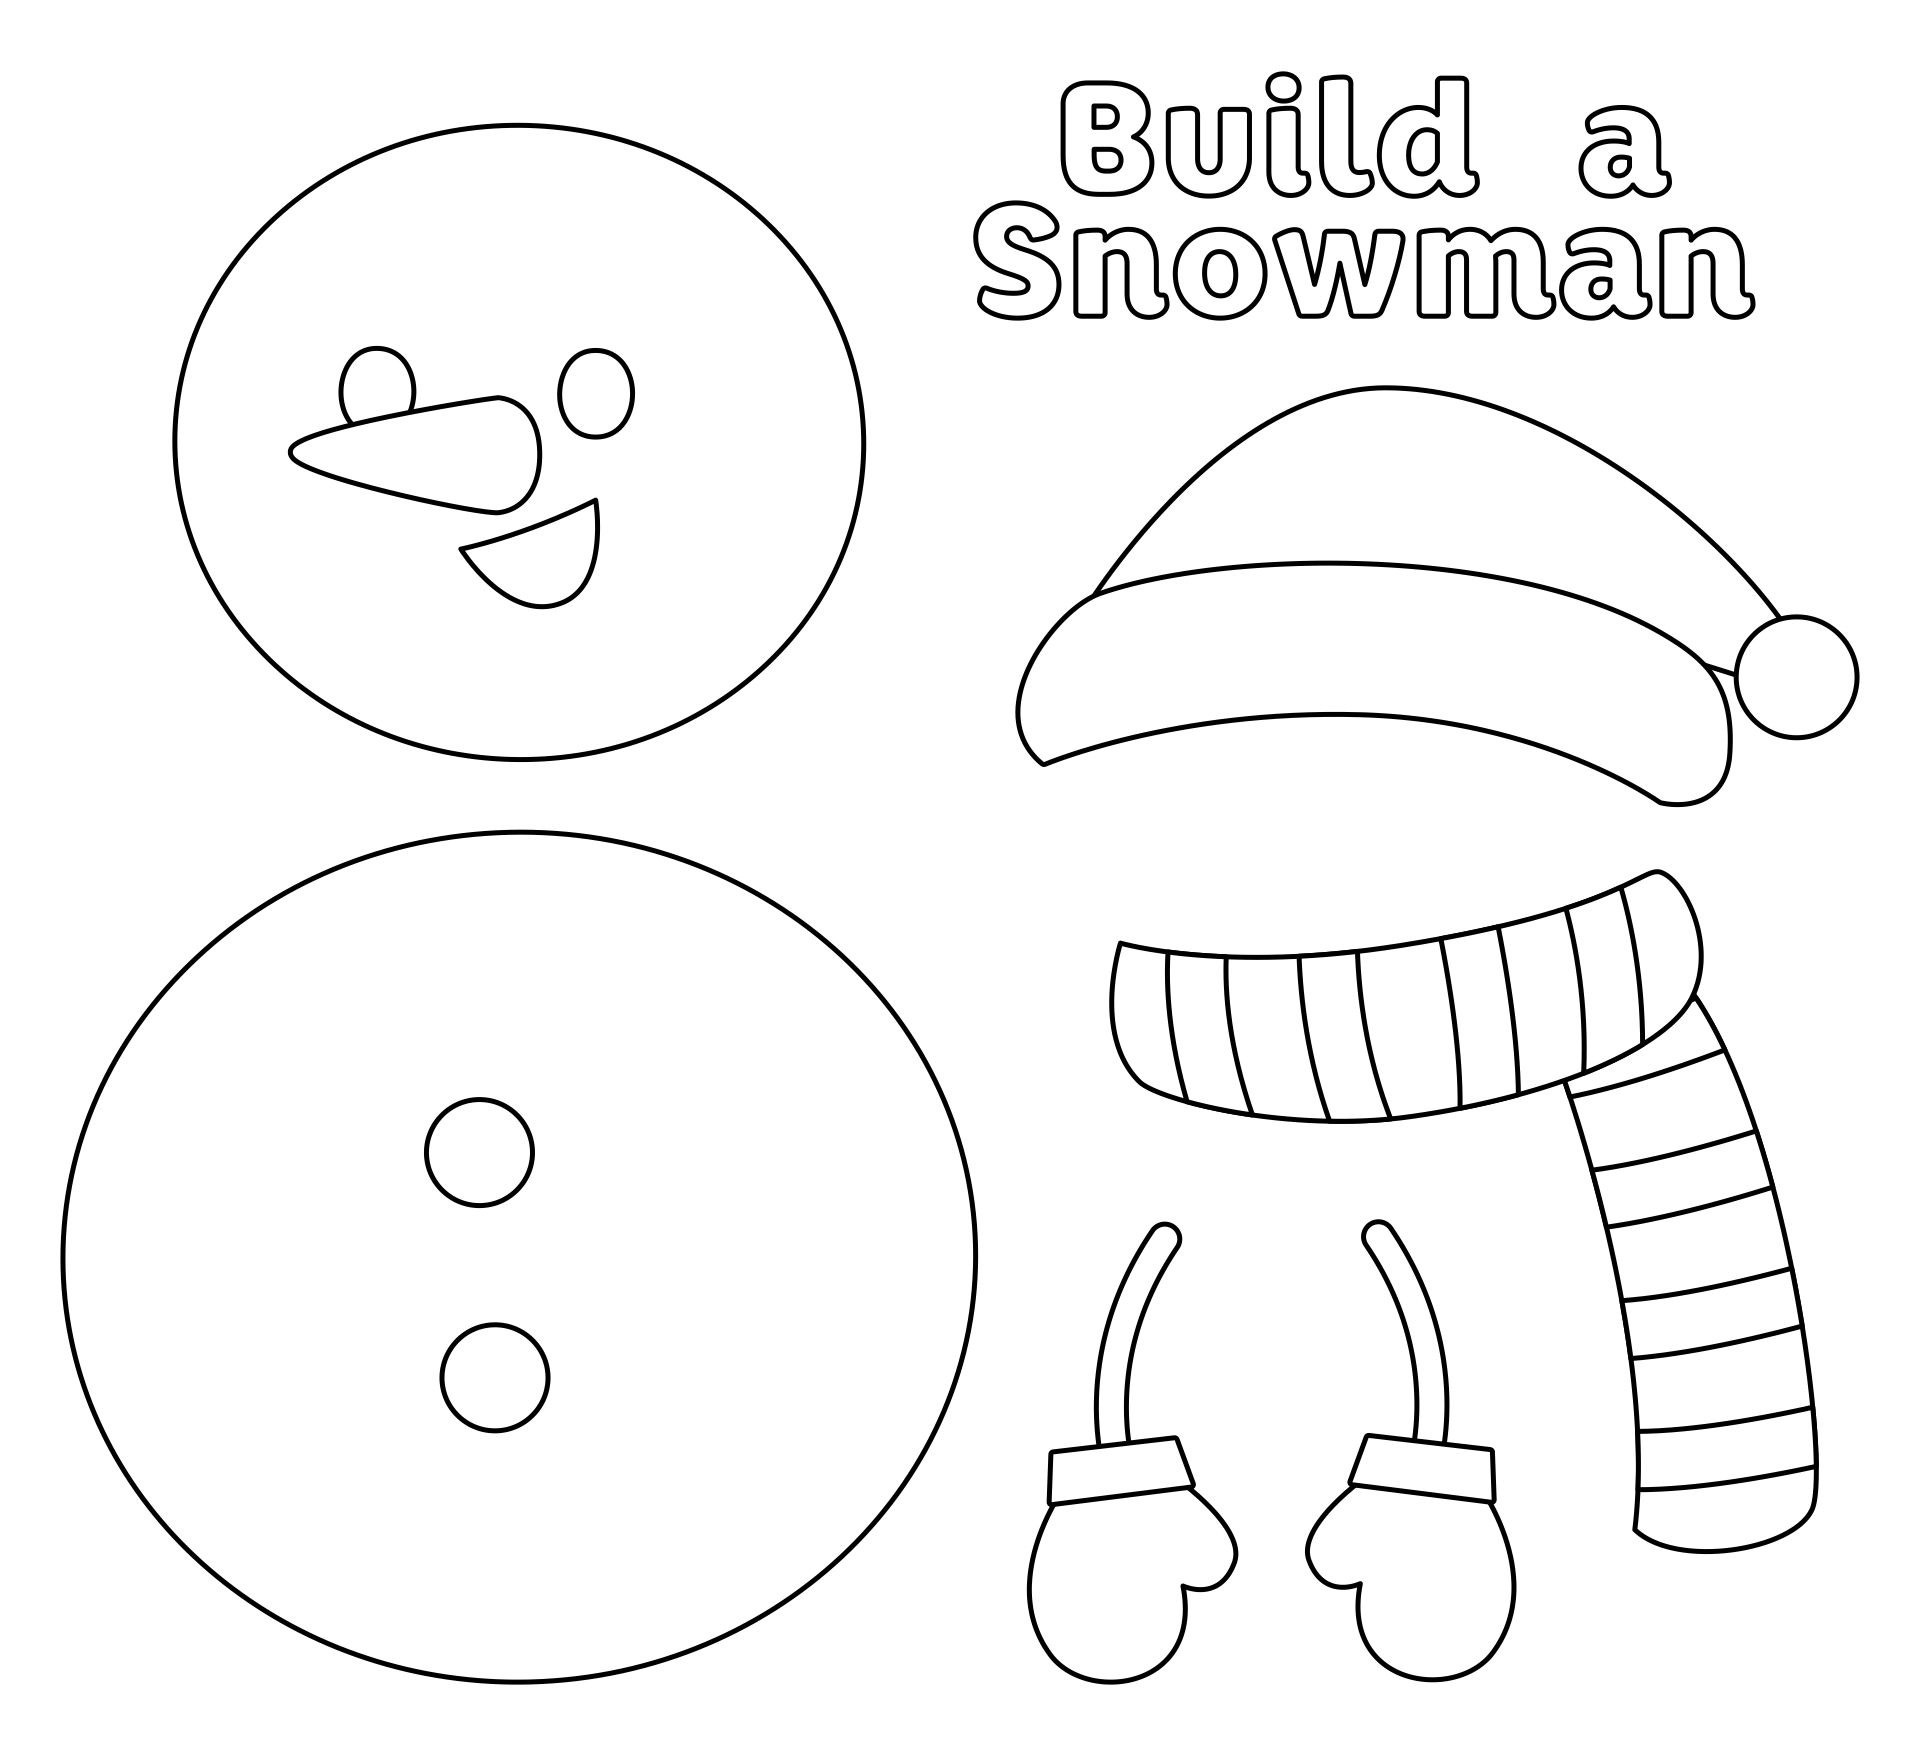 Printable Snowman Templates For Crafts